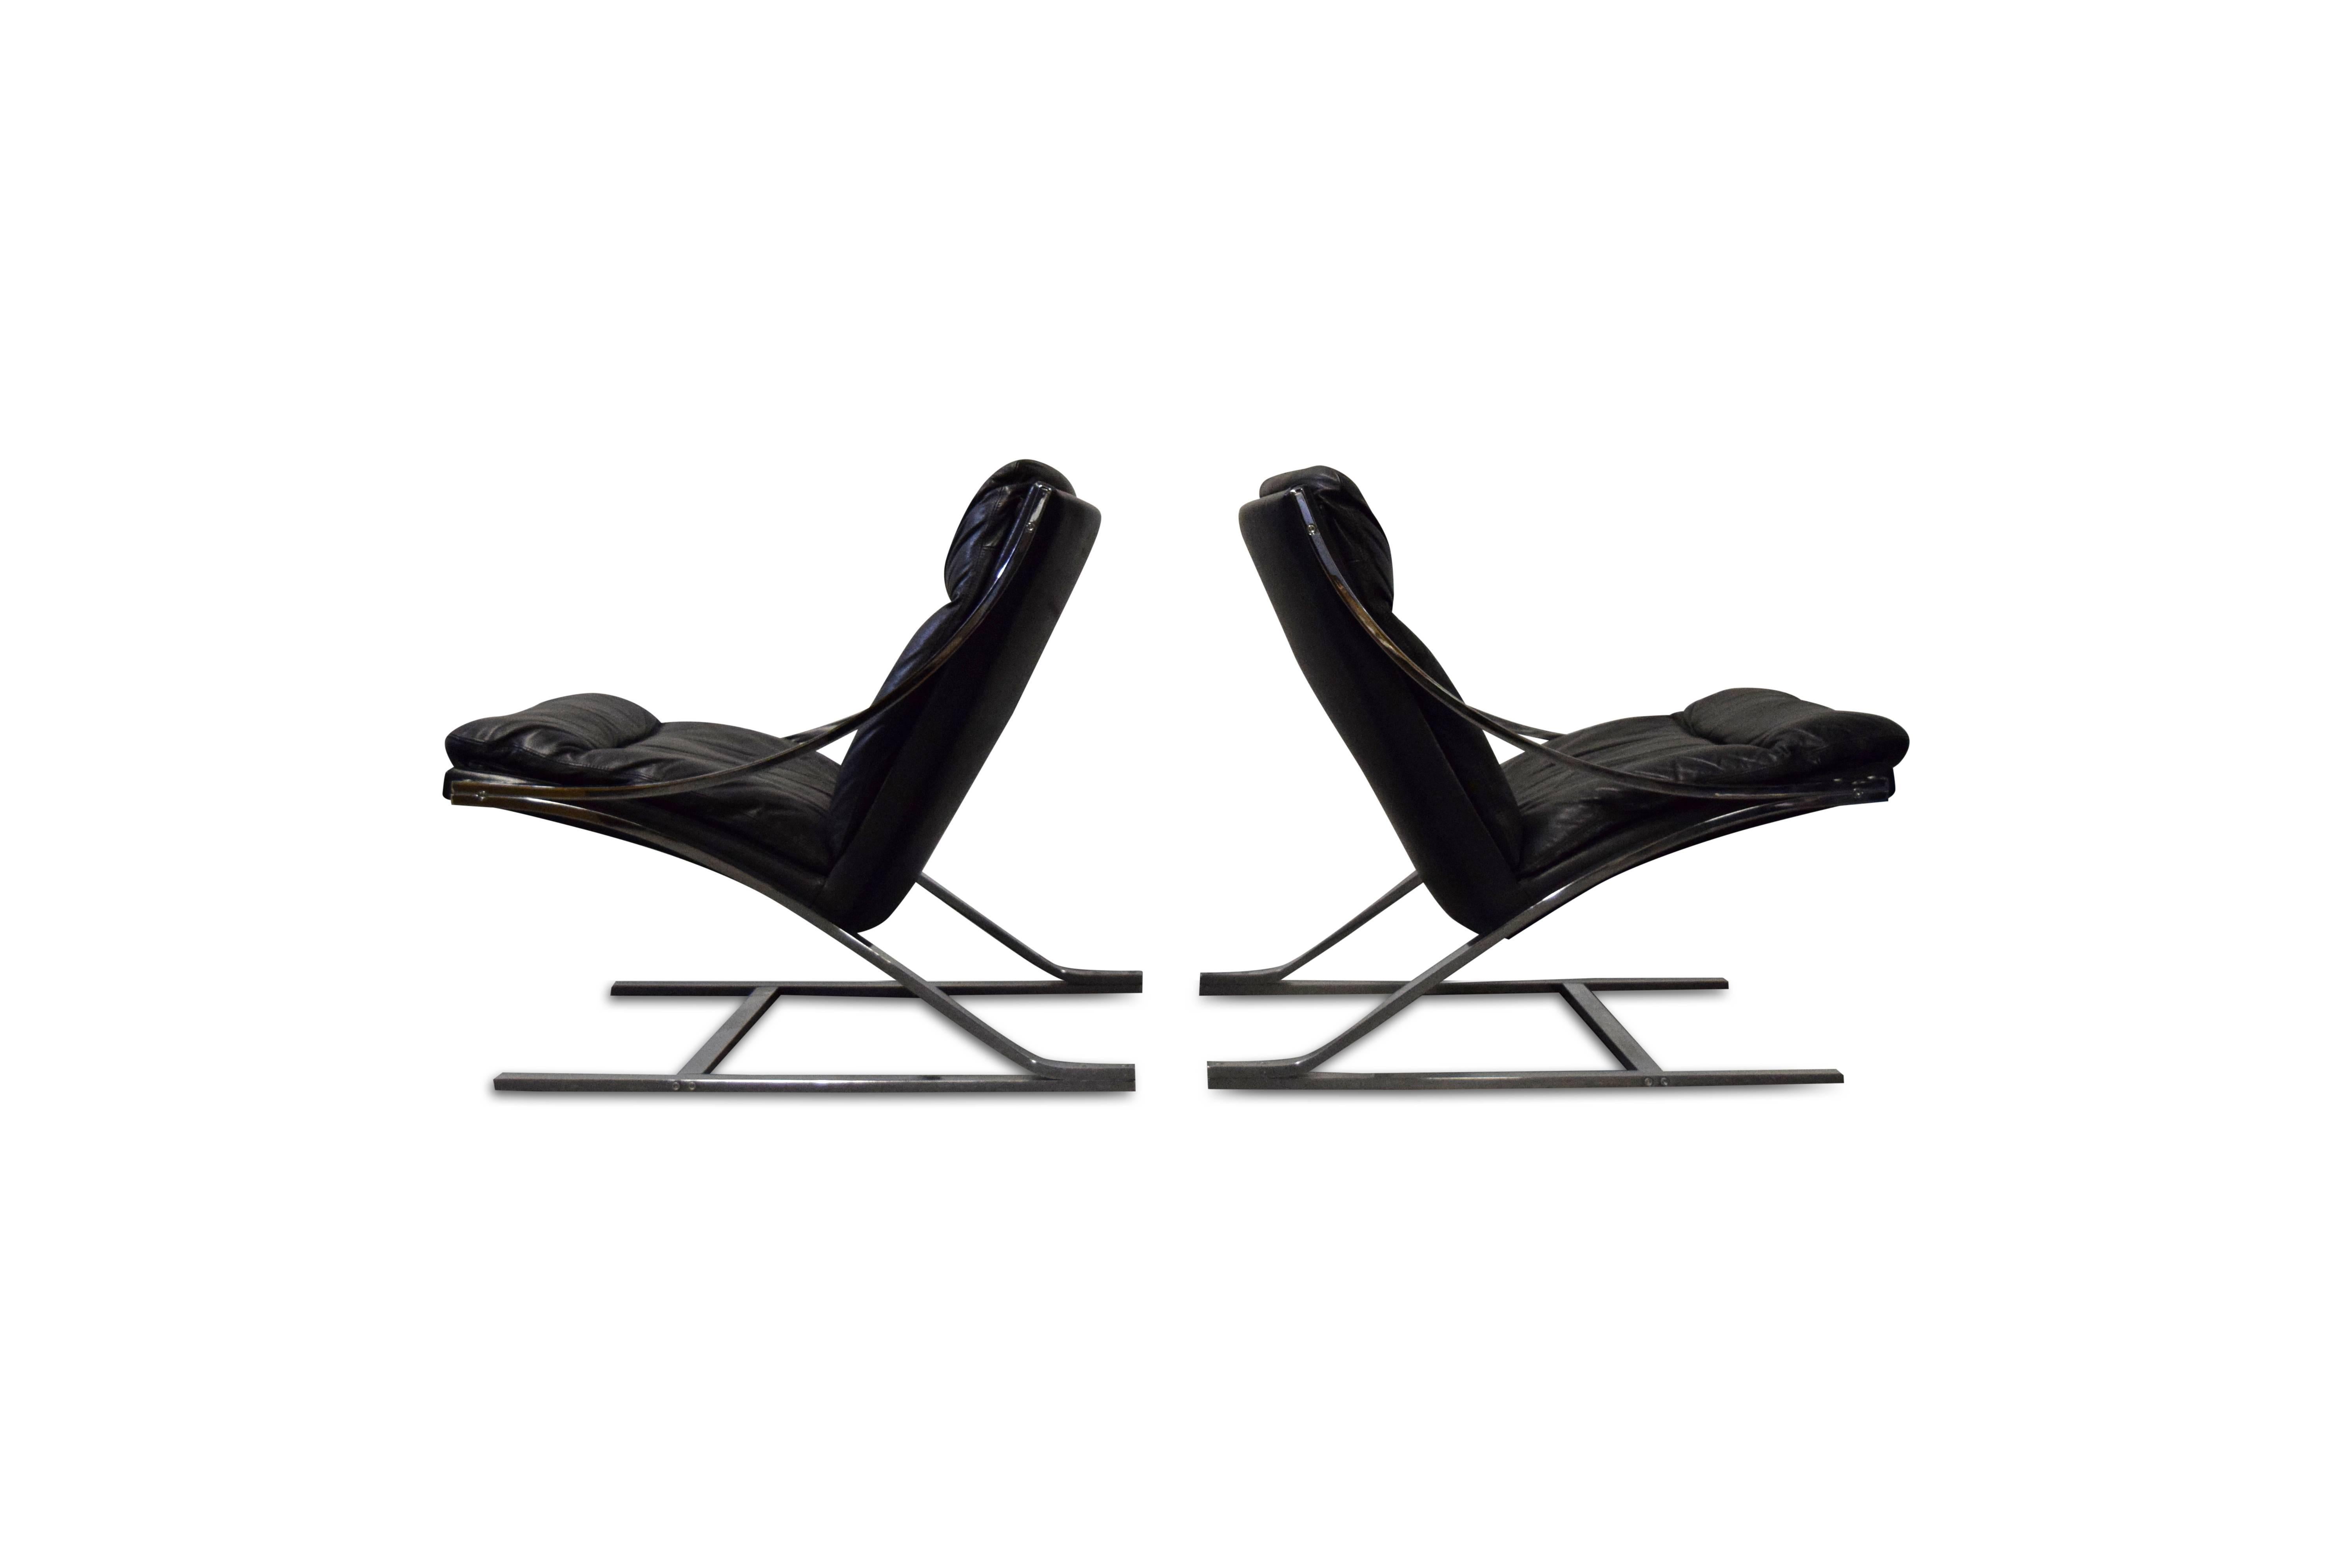 Pair of Paul Tuttle 'Zeta' lounge chairs.